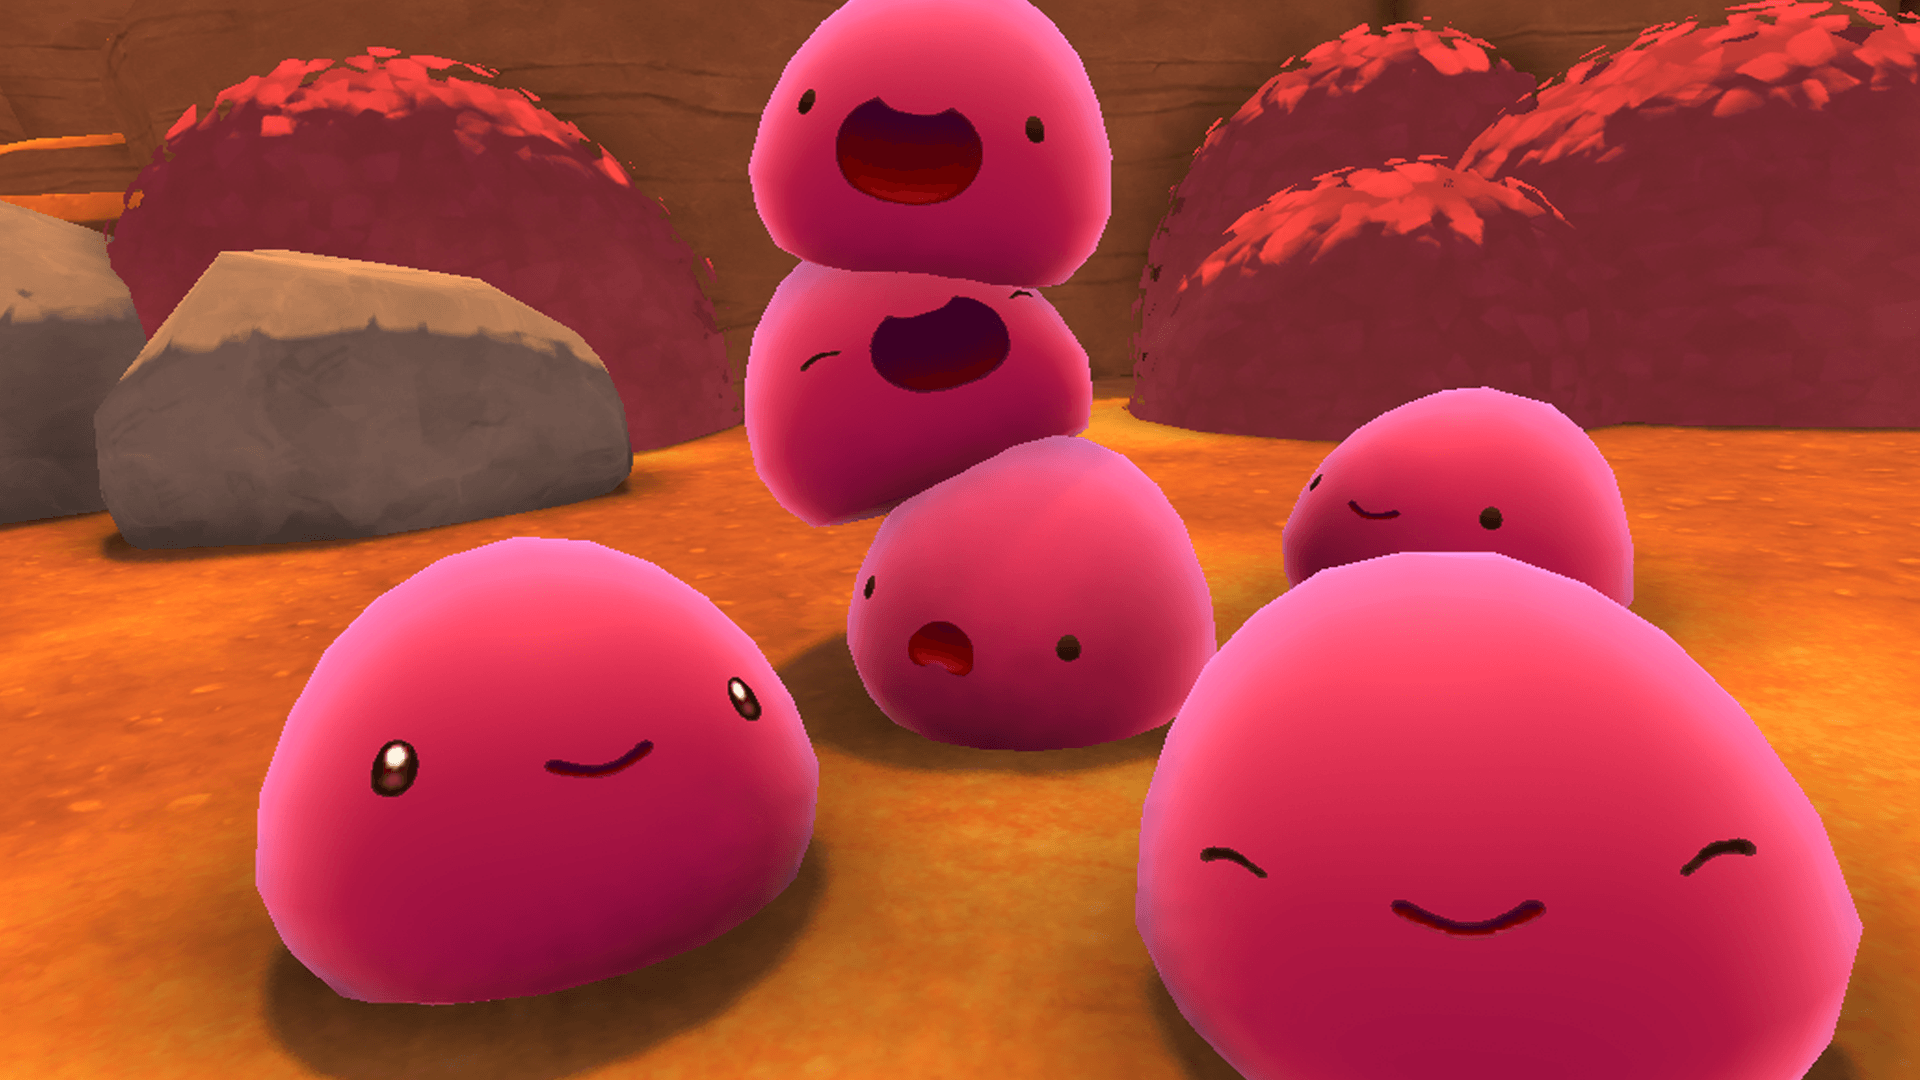 Being an ethically responsible, free range vegan Slime Rancher is